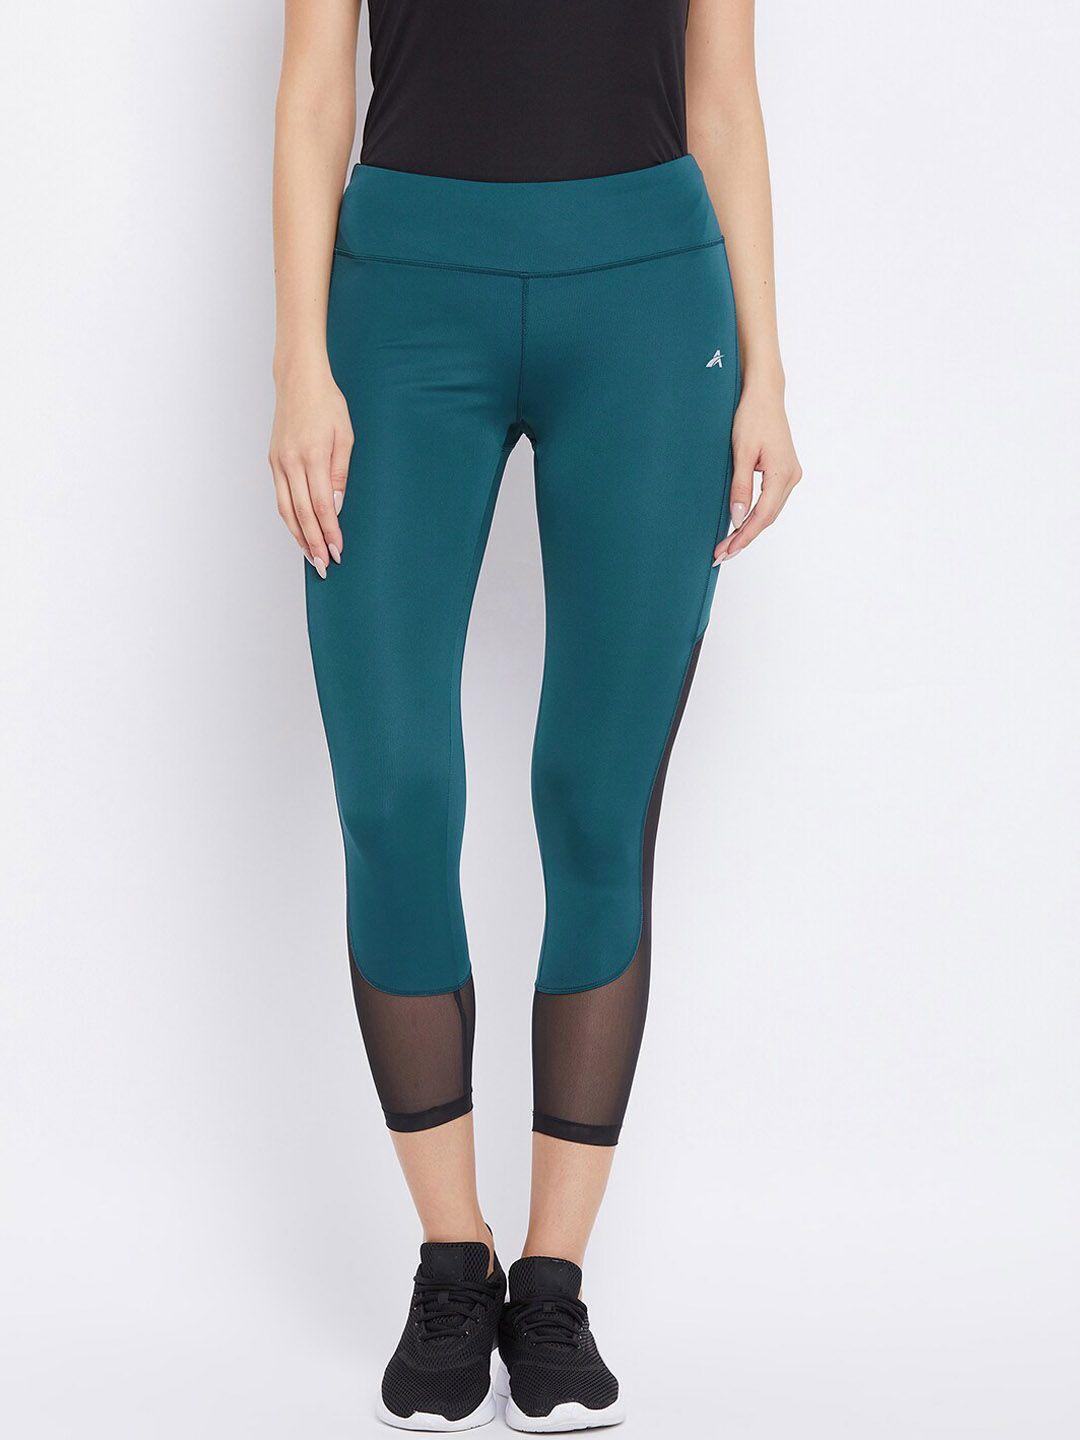 athlisis women teal green & black colourblocked ankle-length e-dry technology training tights